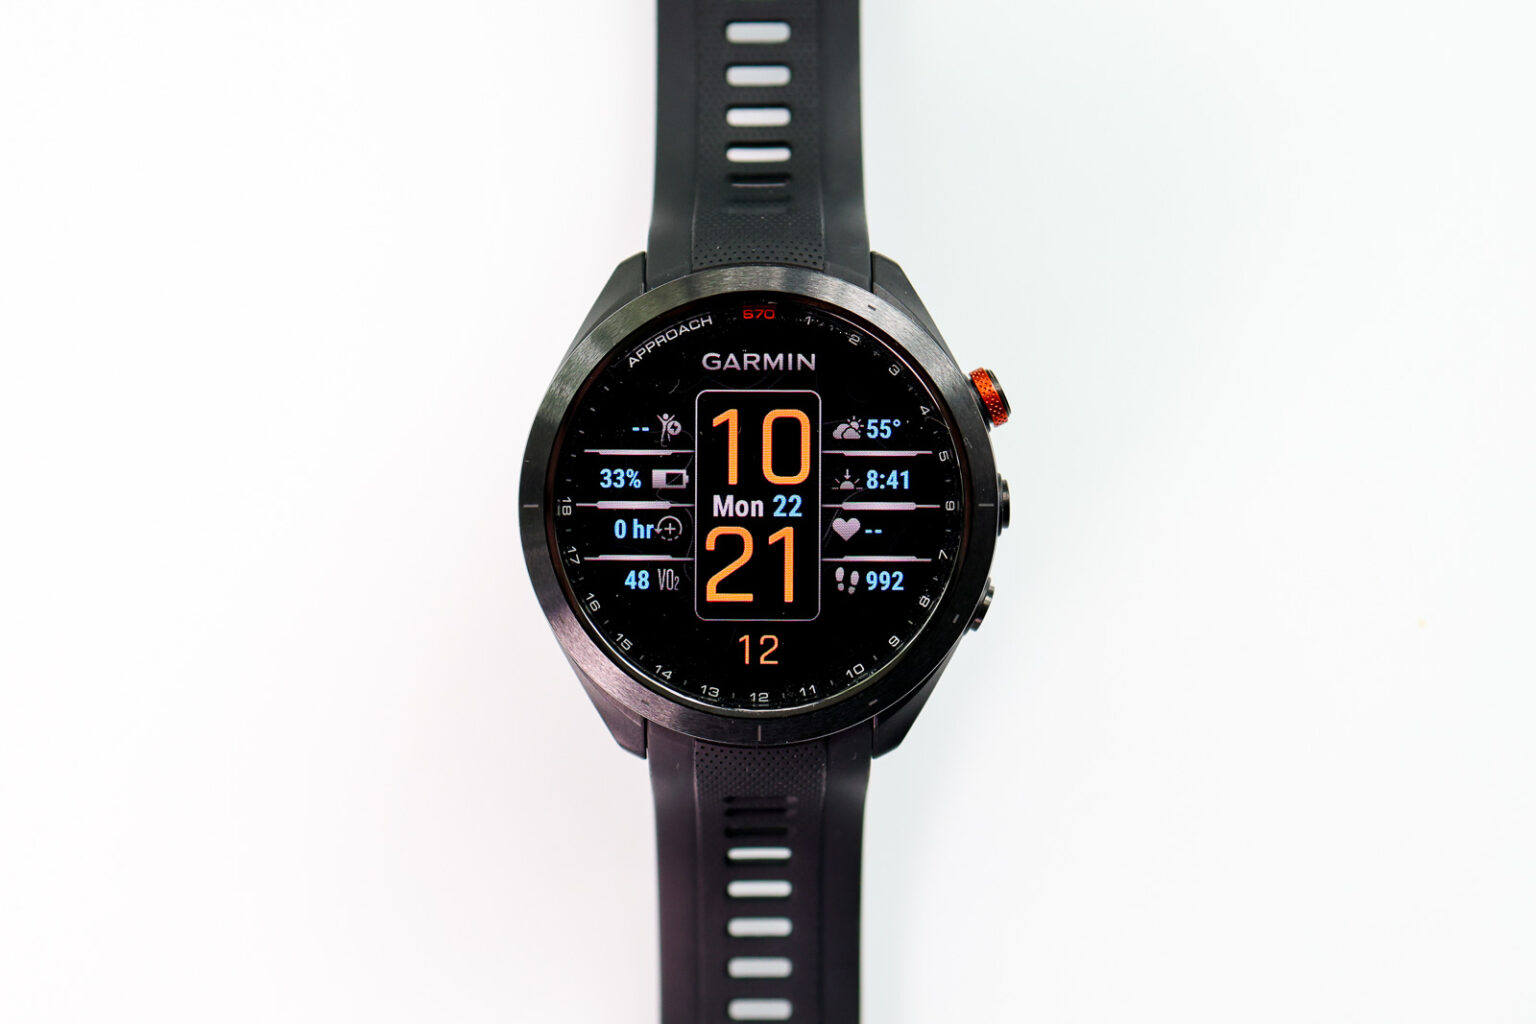 Golf Gps Watch With Fitness Tracker